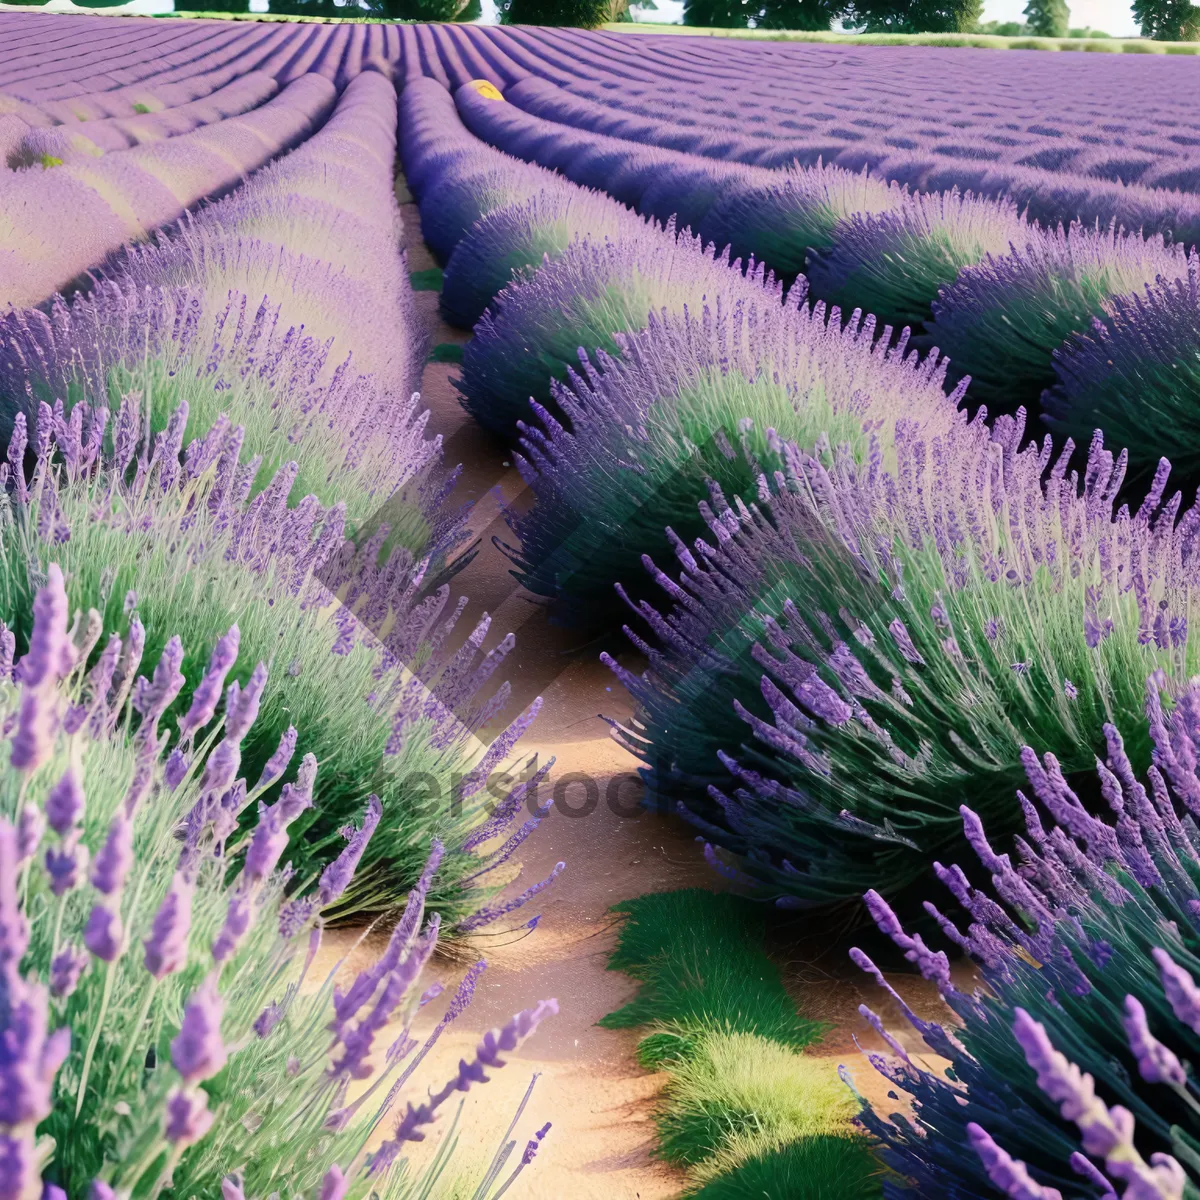 Picture of Colorful Lavender Herb in a Rural Farm Field